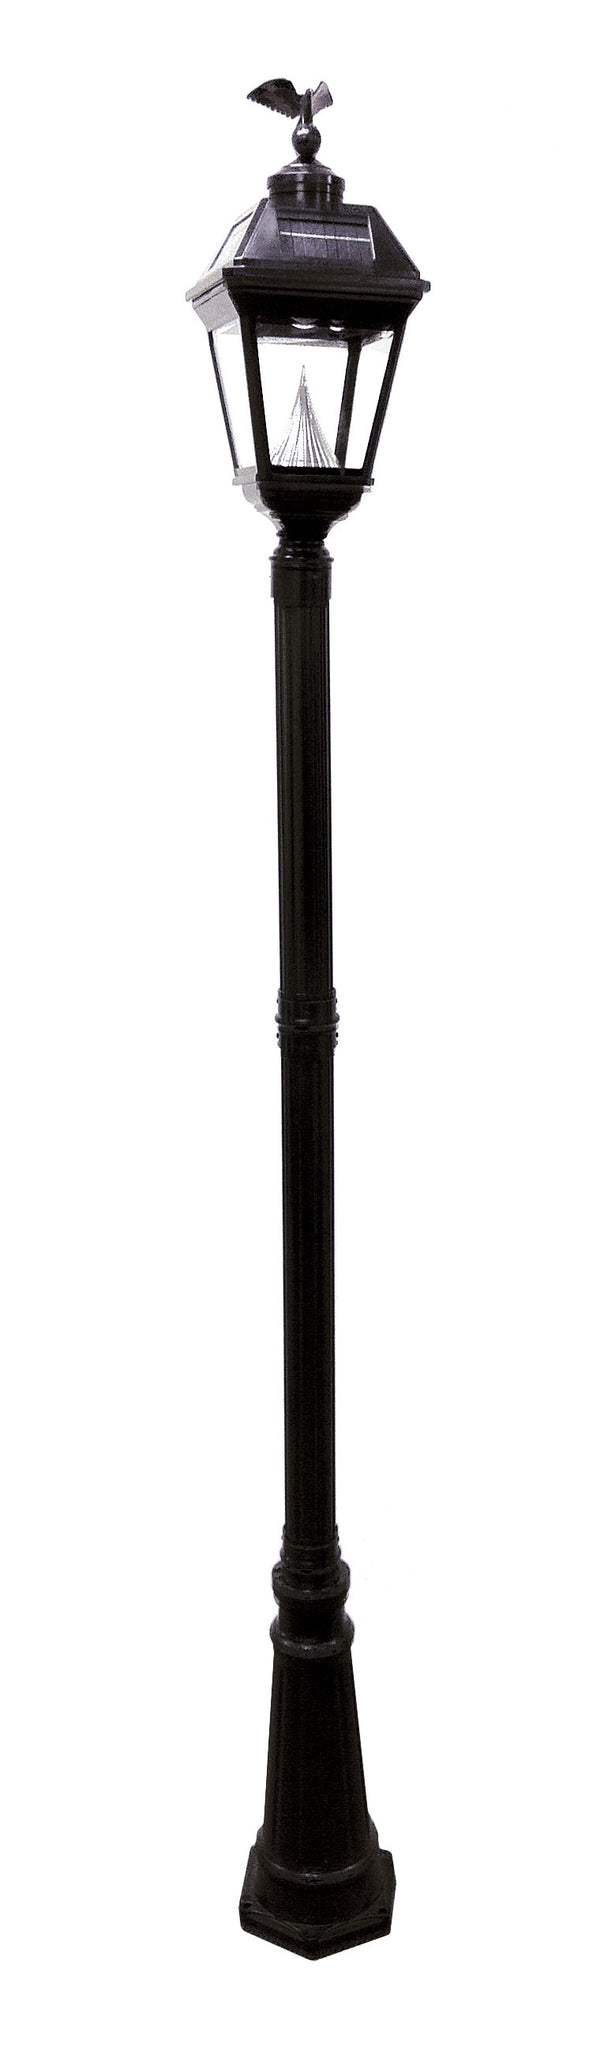 Gama Sonic Imperial Light Pole (without light fixture), GS-97SP-BLK –  Quality Construction Supply